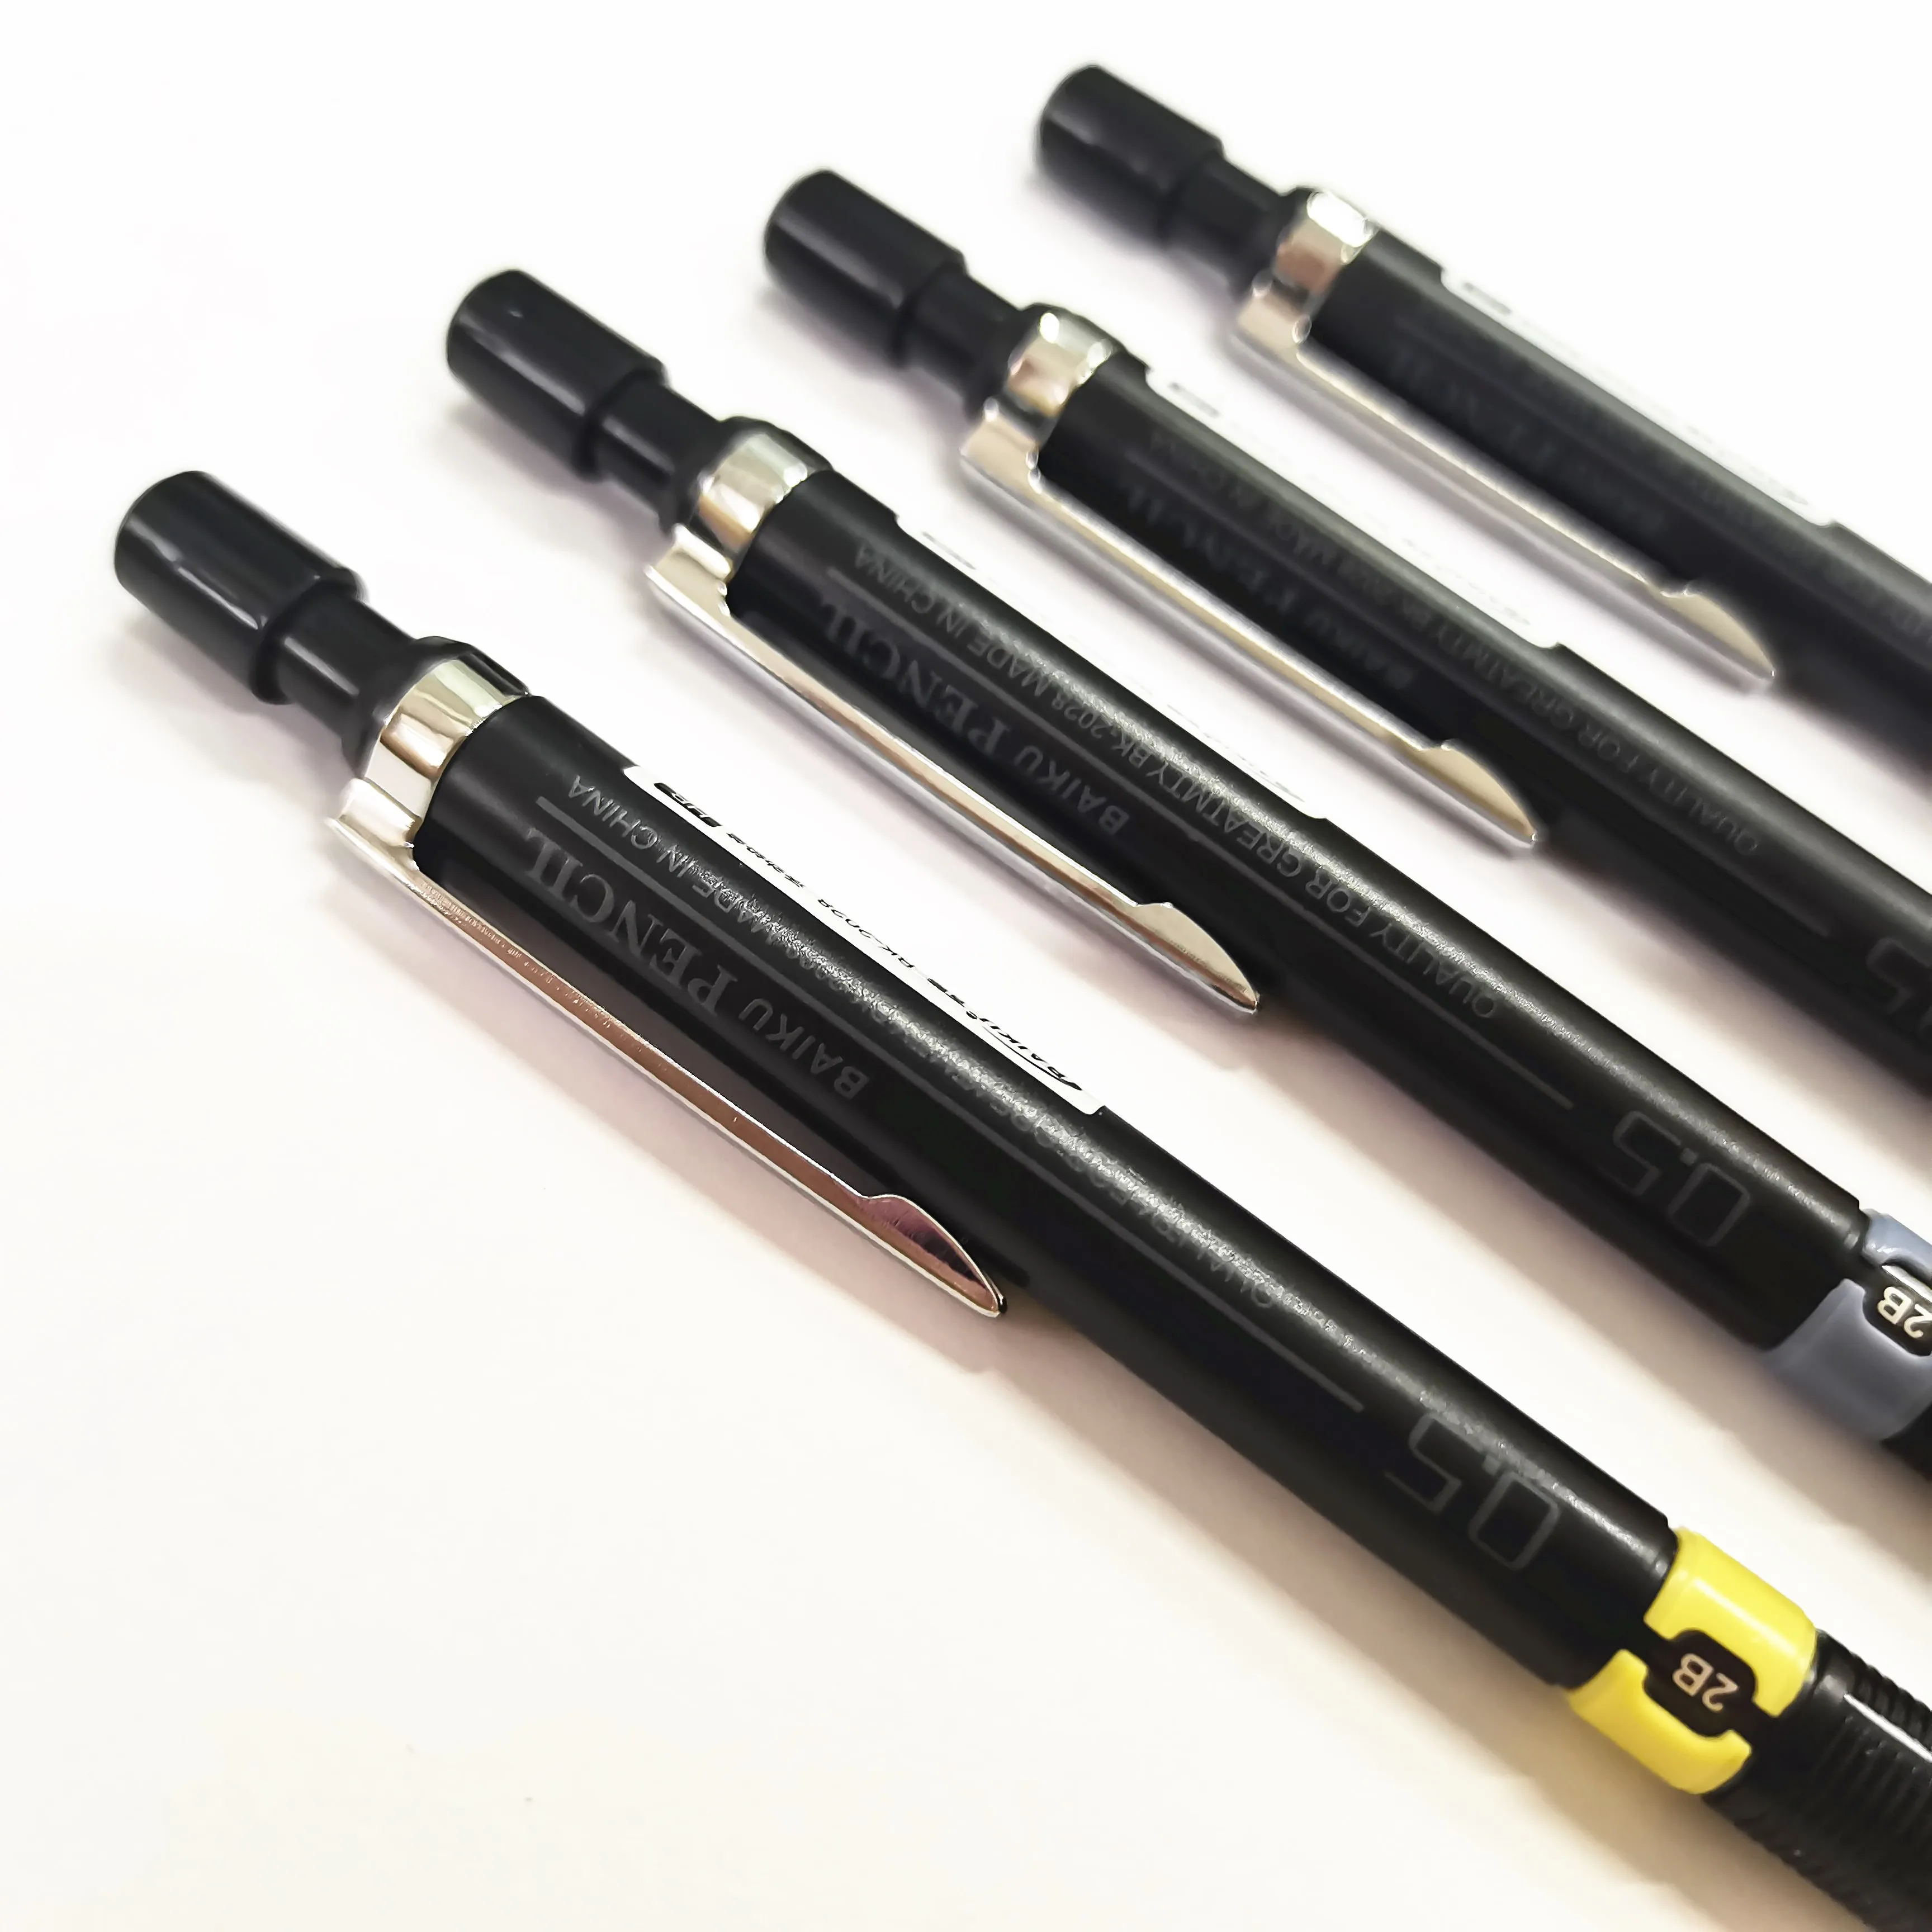 0.3/0.5/0.7/0.9 mm mechanical pencils with metal mechanism classic style